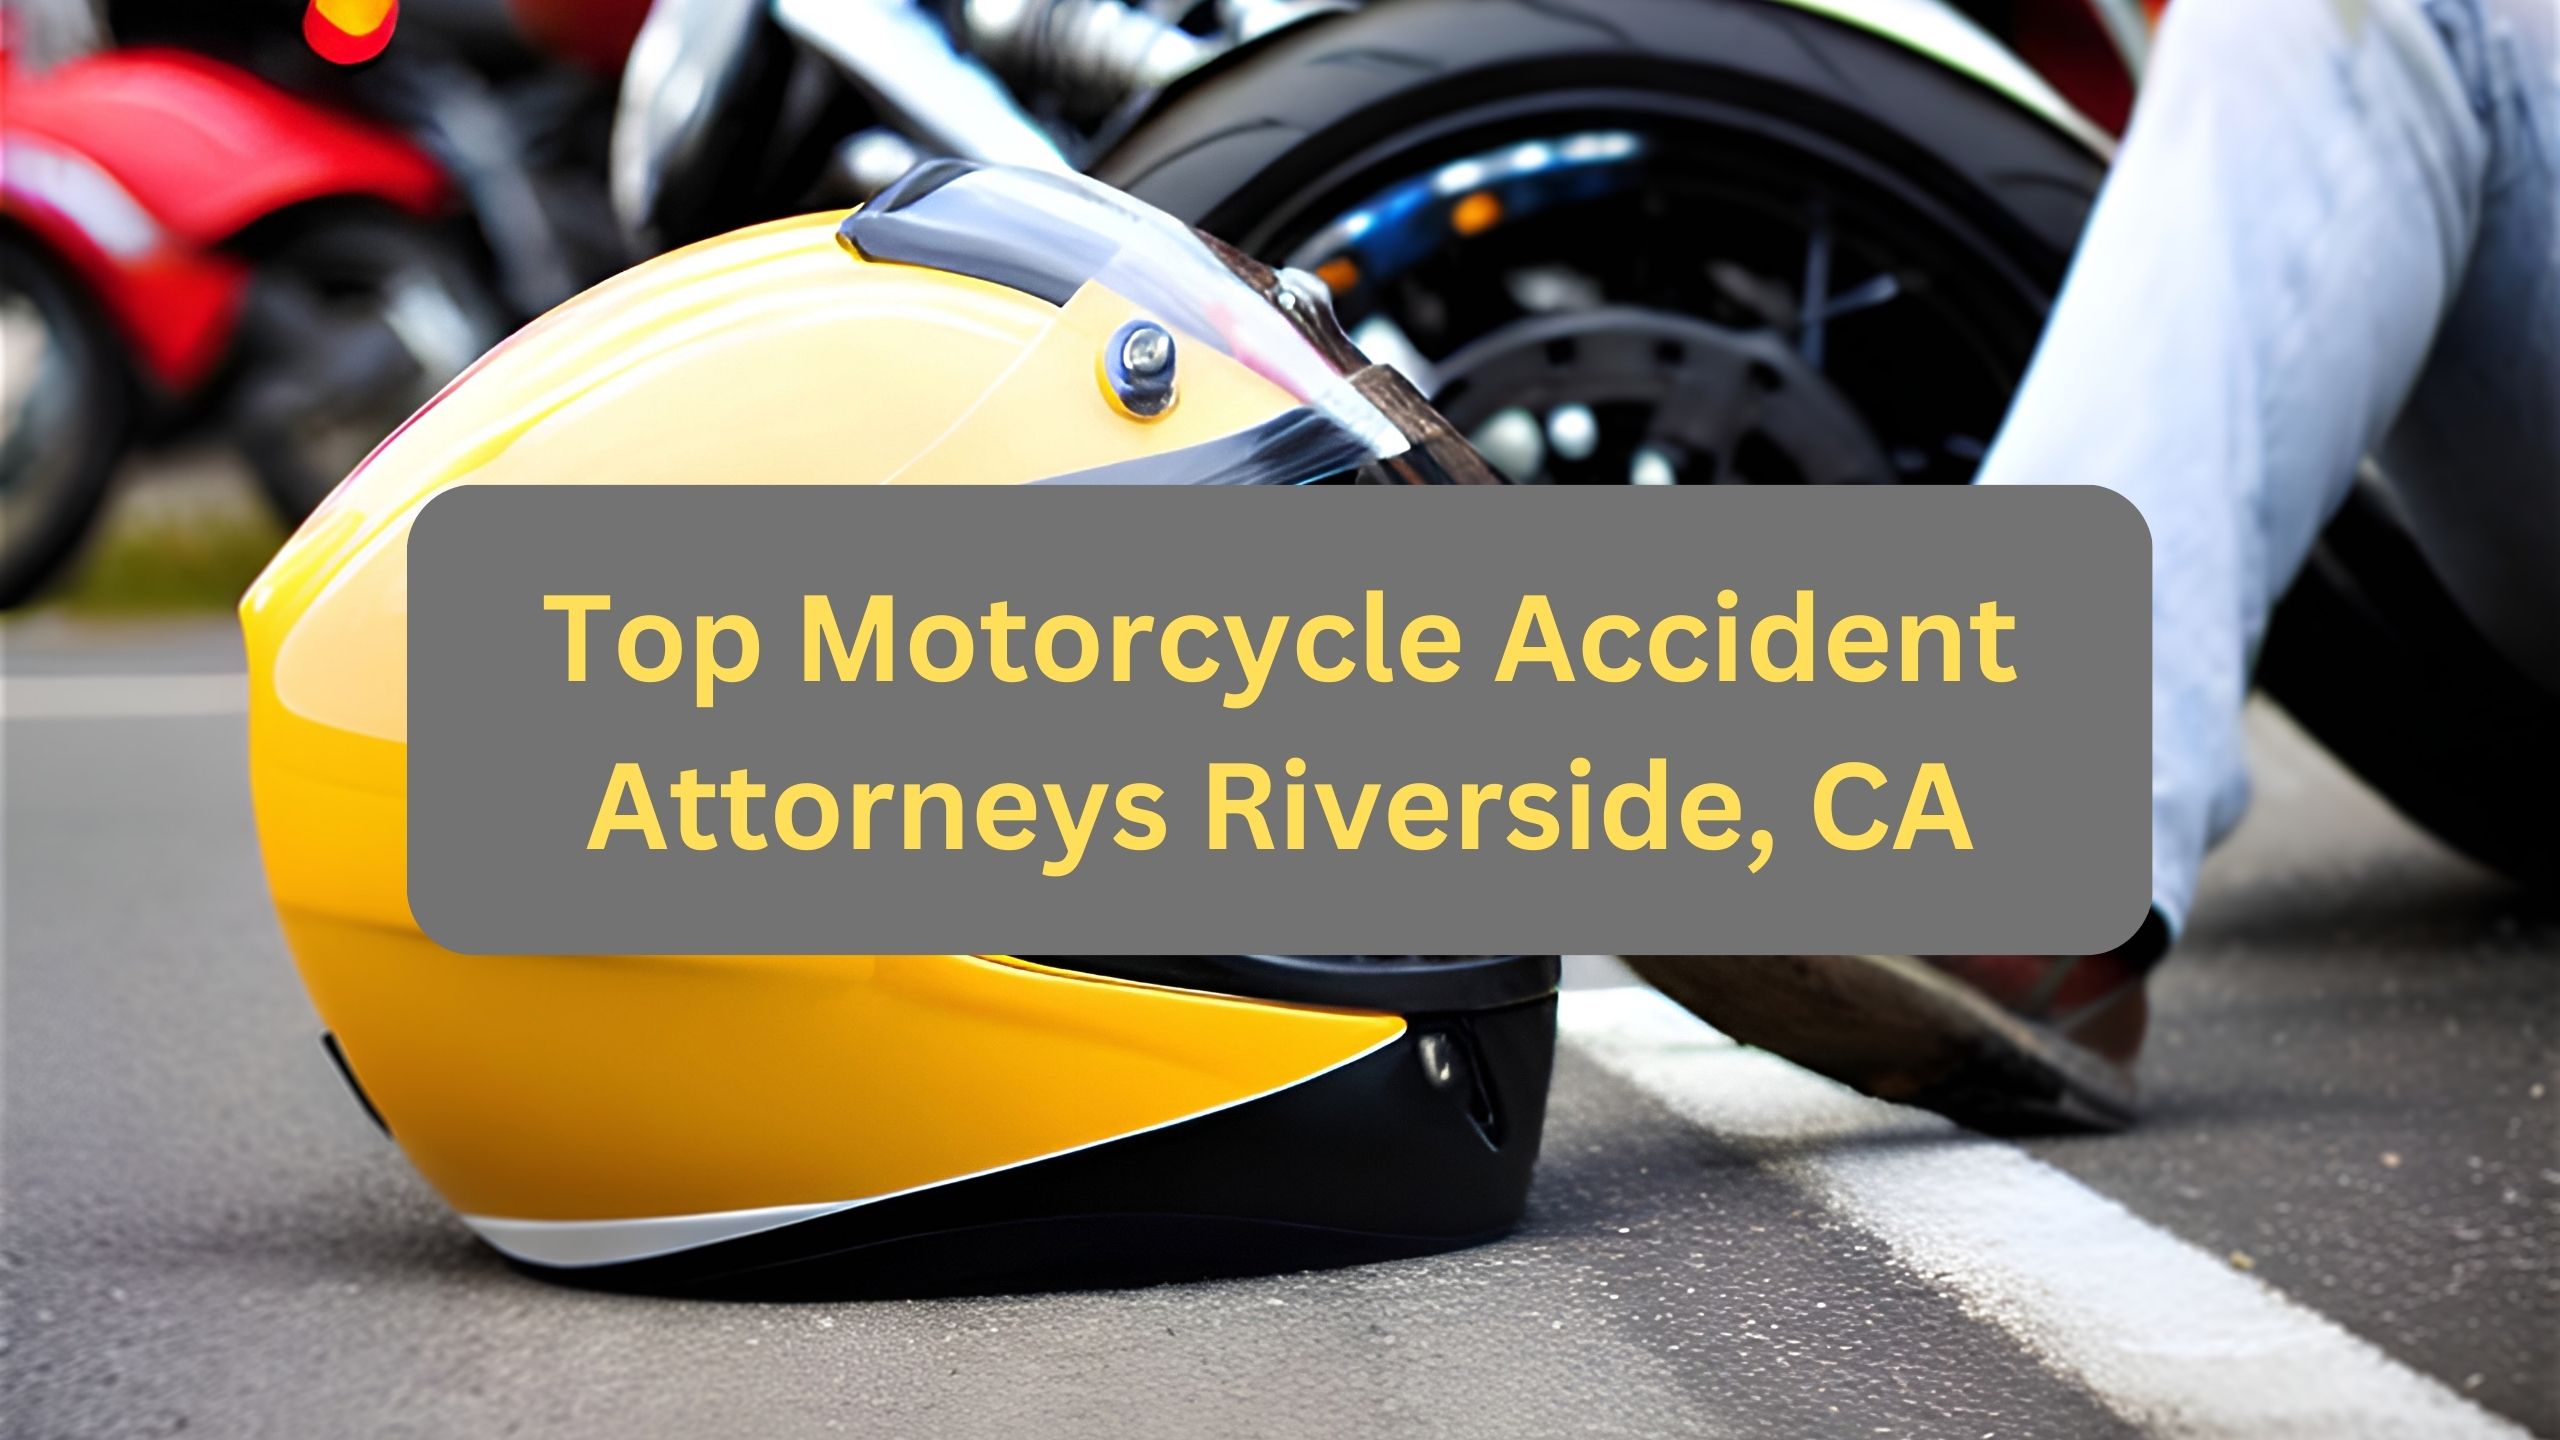 Top Motorcycle Accident Attorneys Riverside